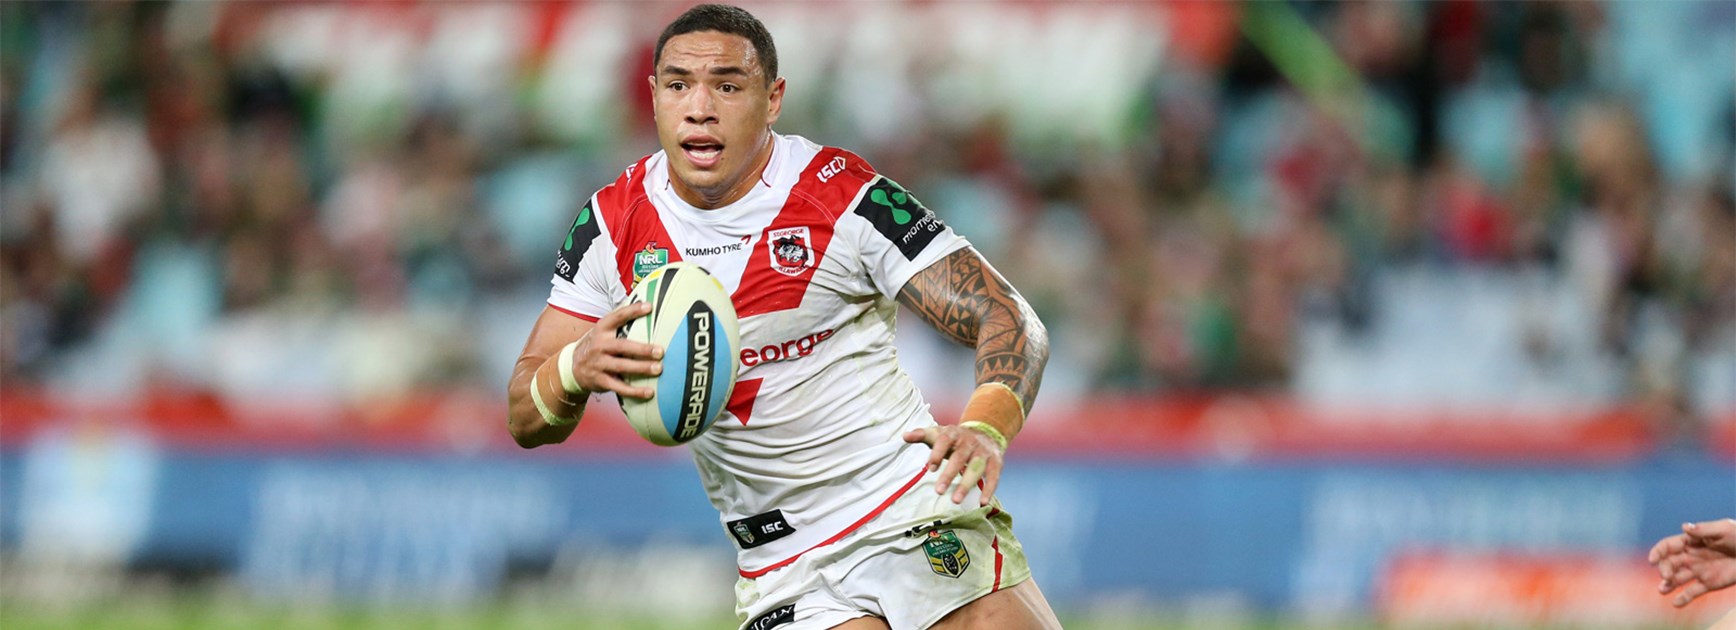 Tyson Frizell has already made an impact on the NRL... and now wants to start a footwear trend in the lower leagues.